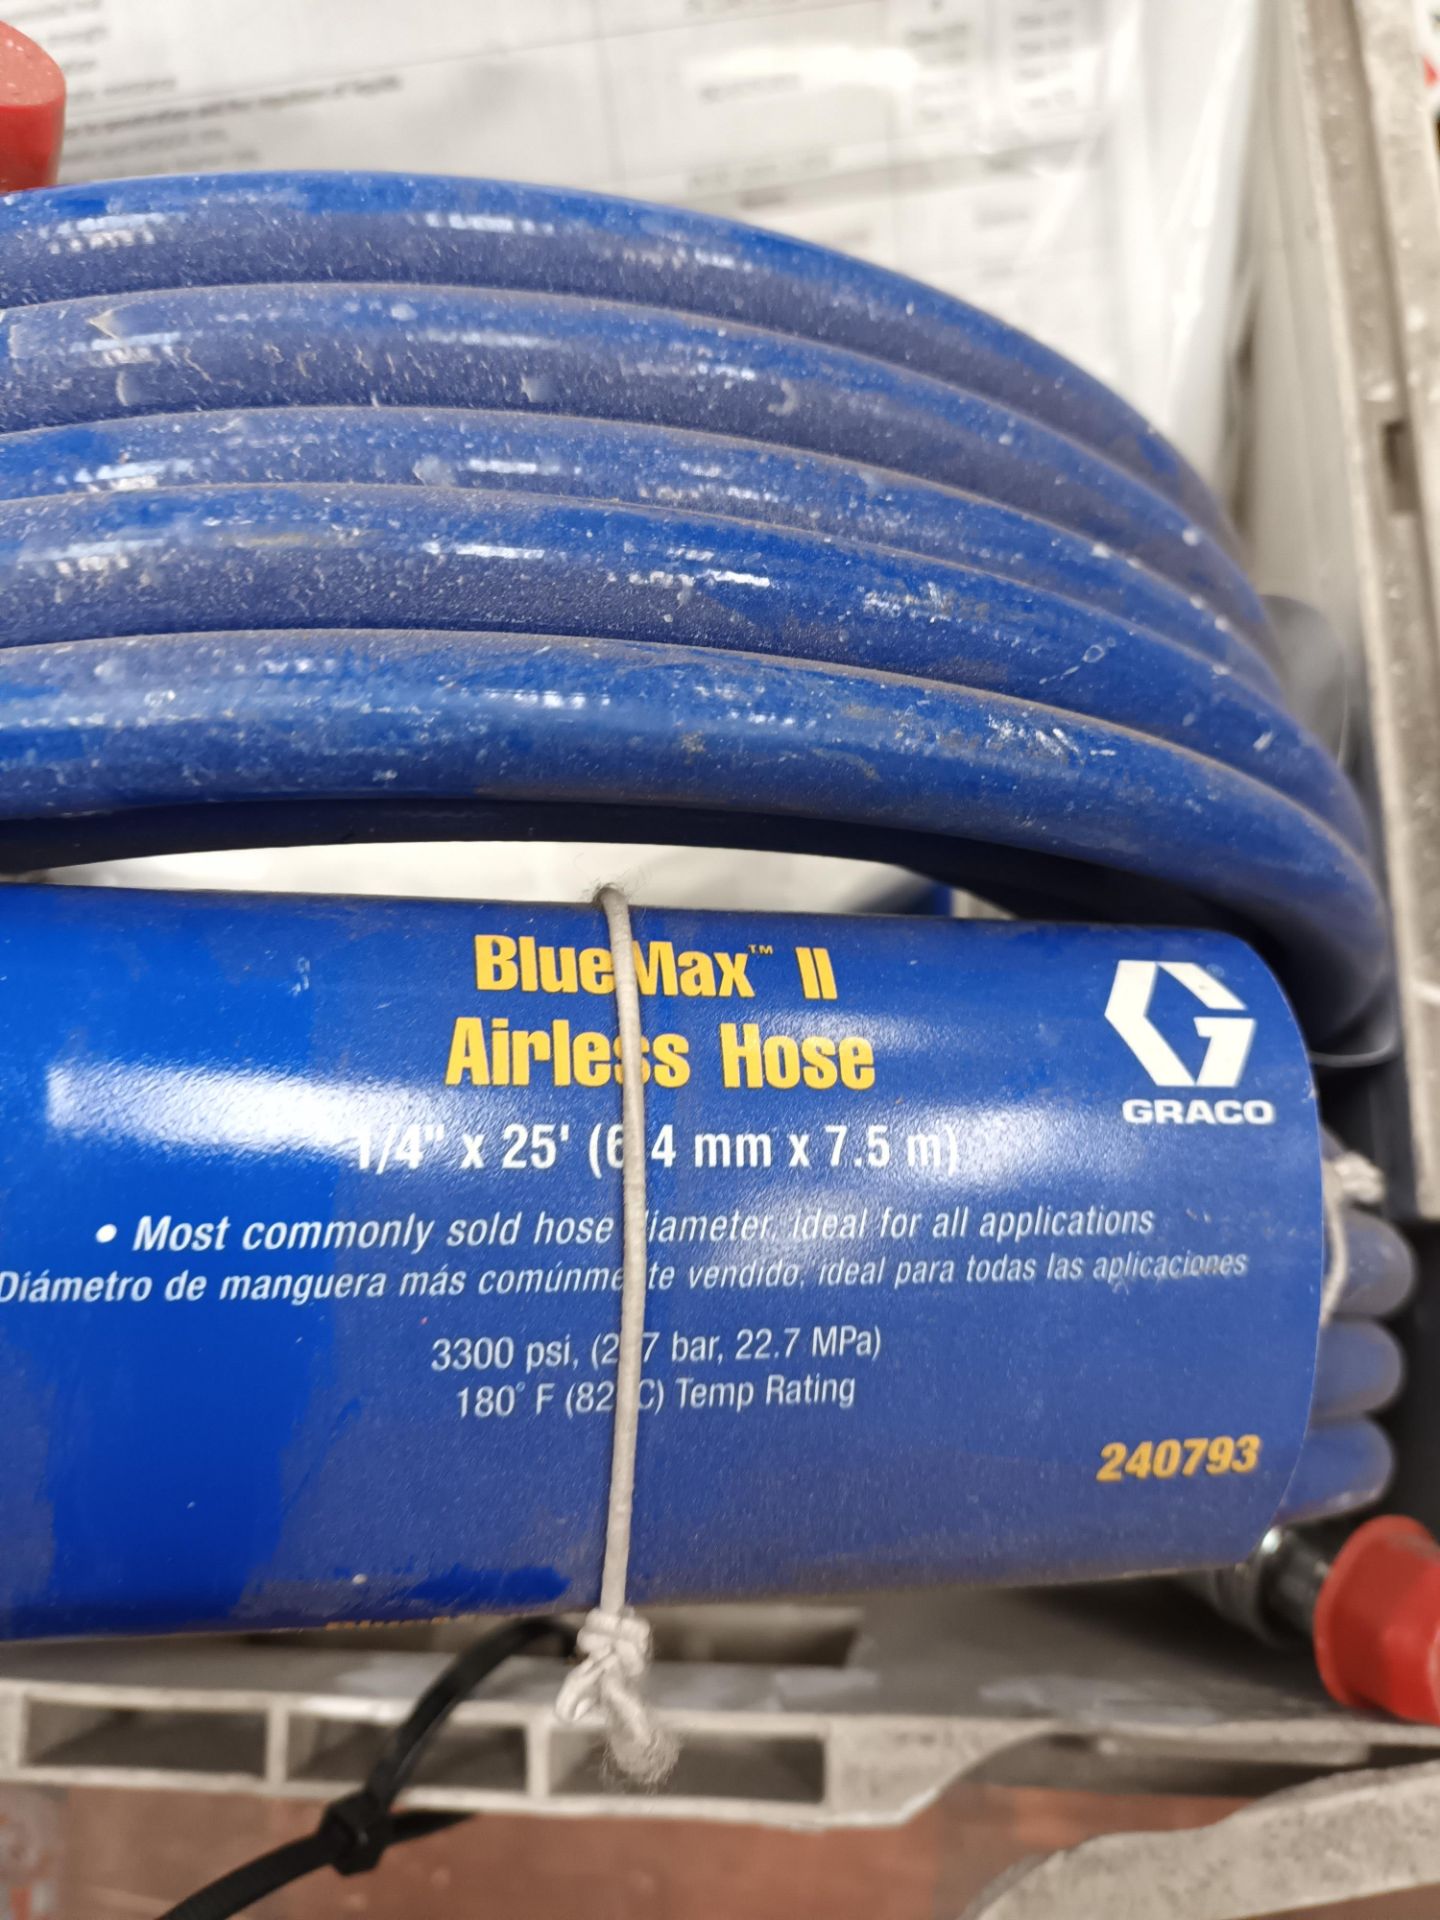 Two BlueMax II airless hoses with various protective overalls - Image 2 of 4